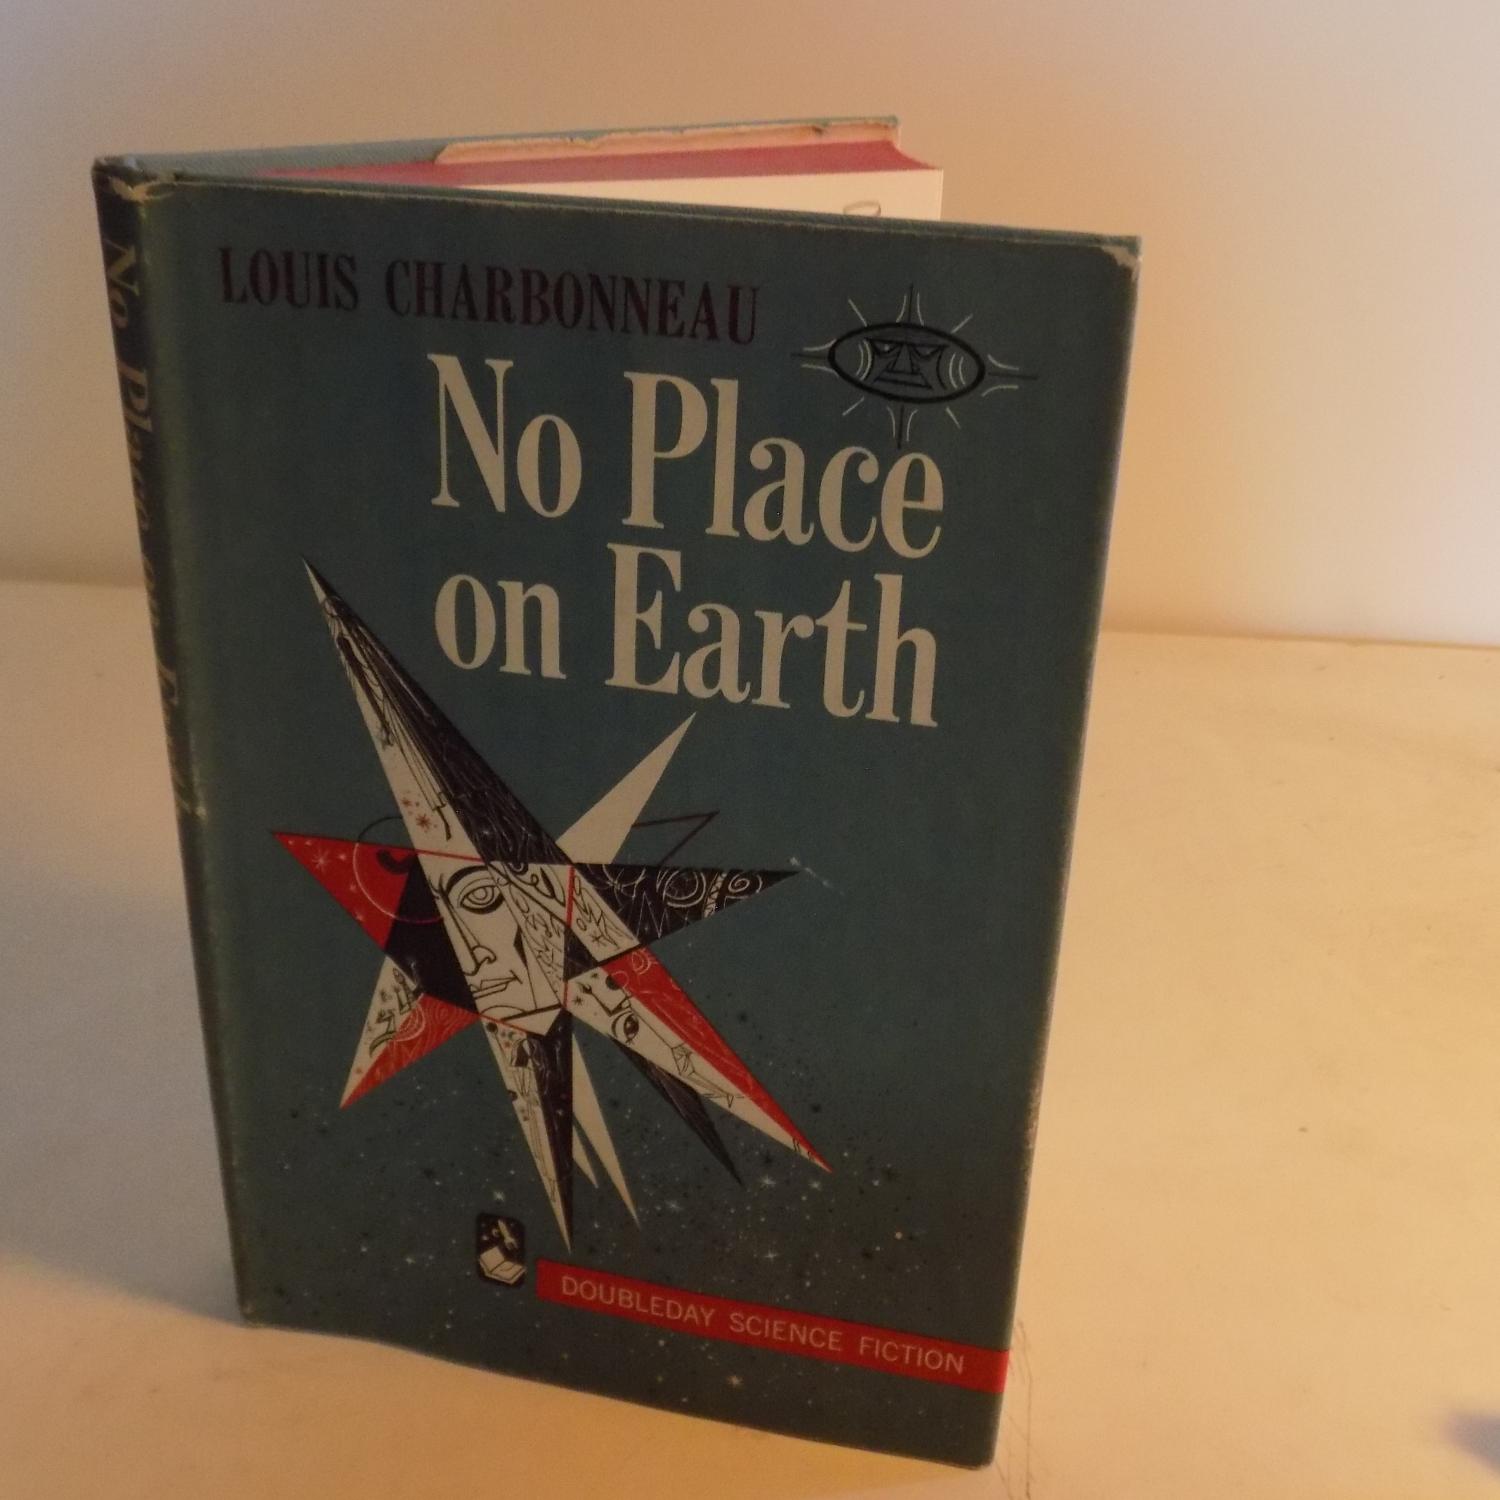 No Place on Earth by Louis Charbonneau